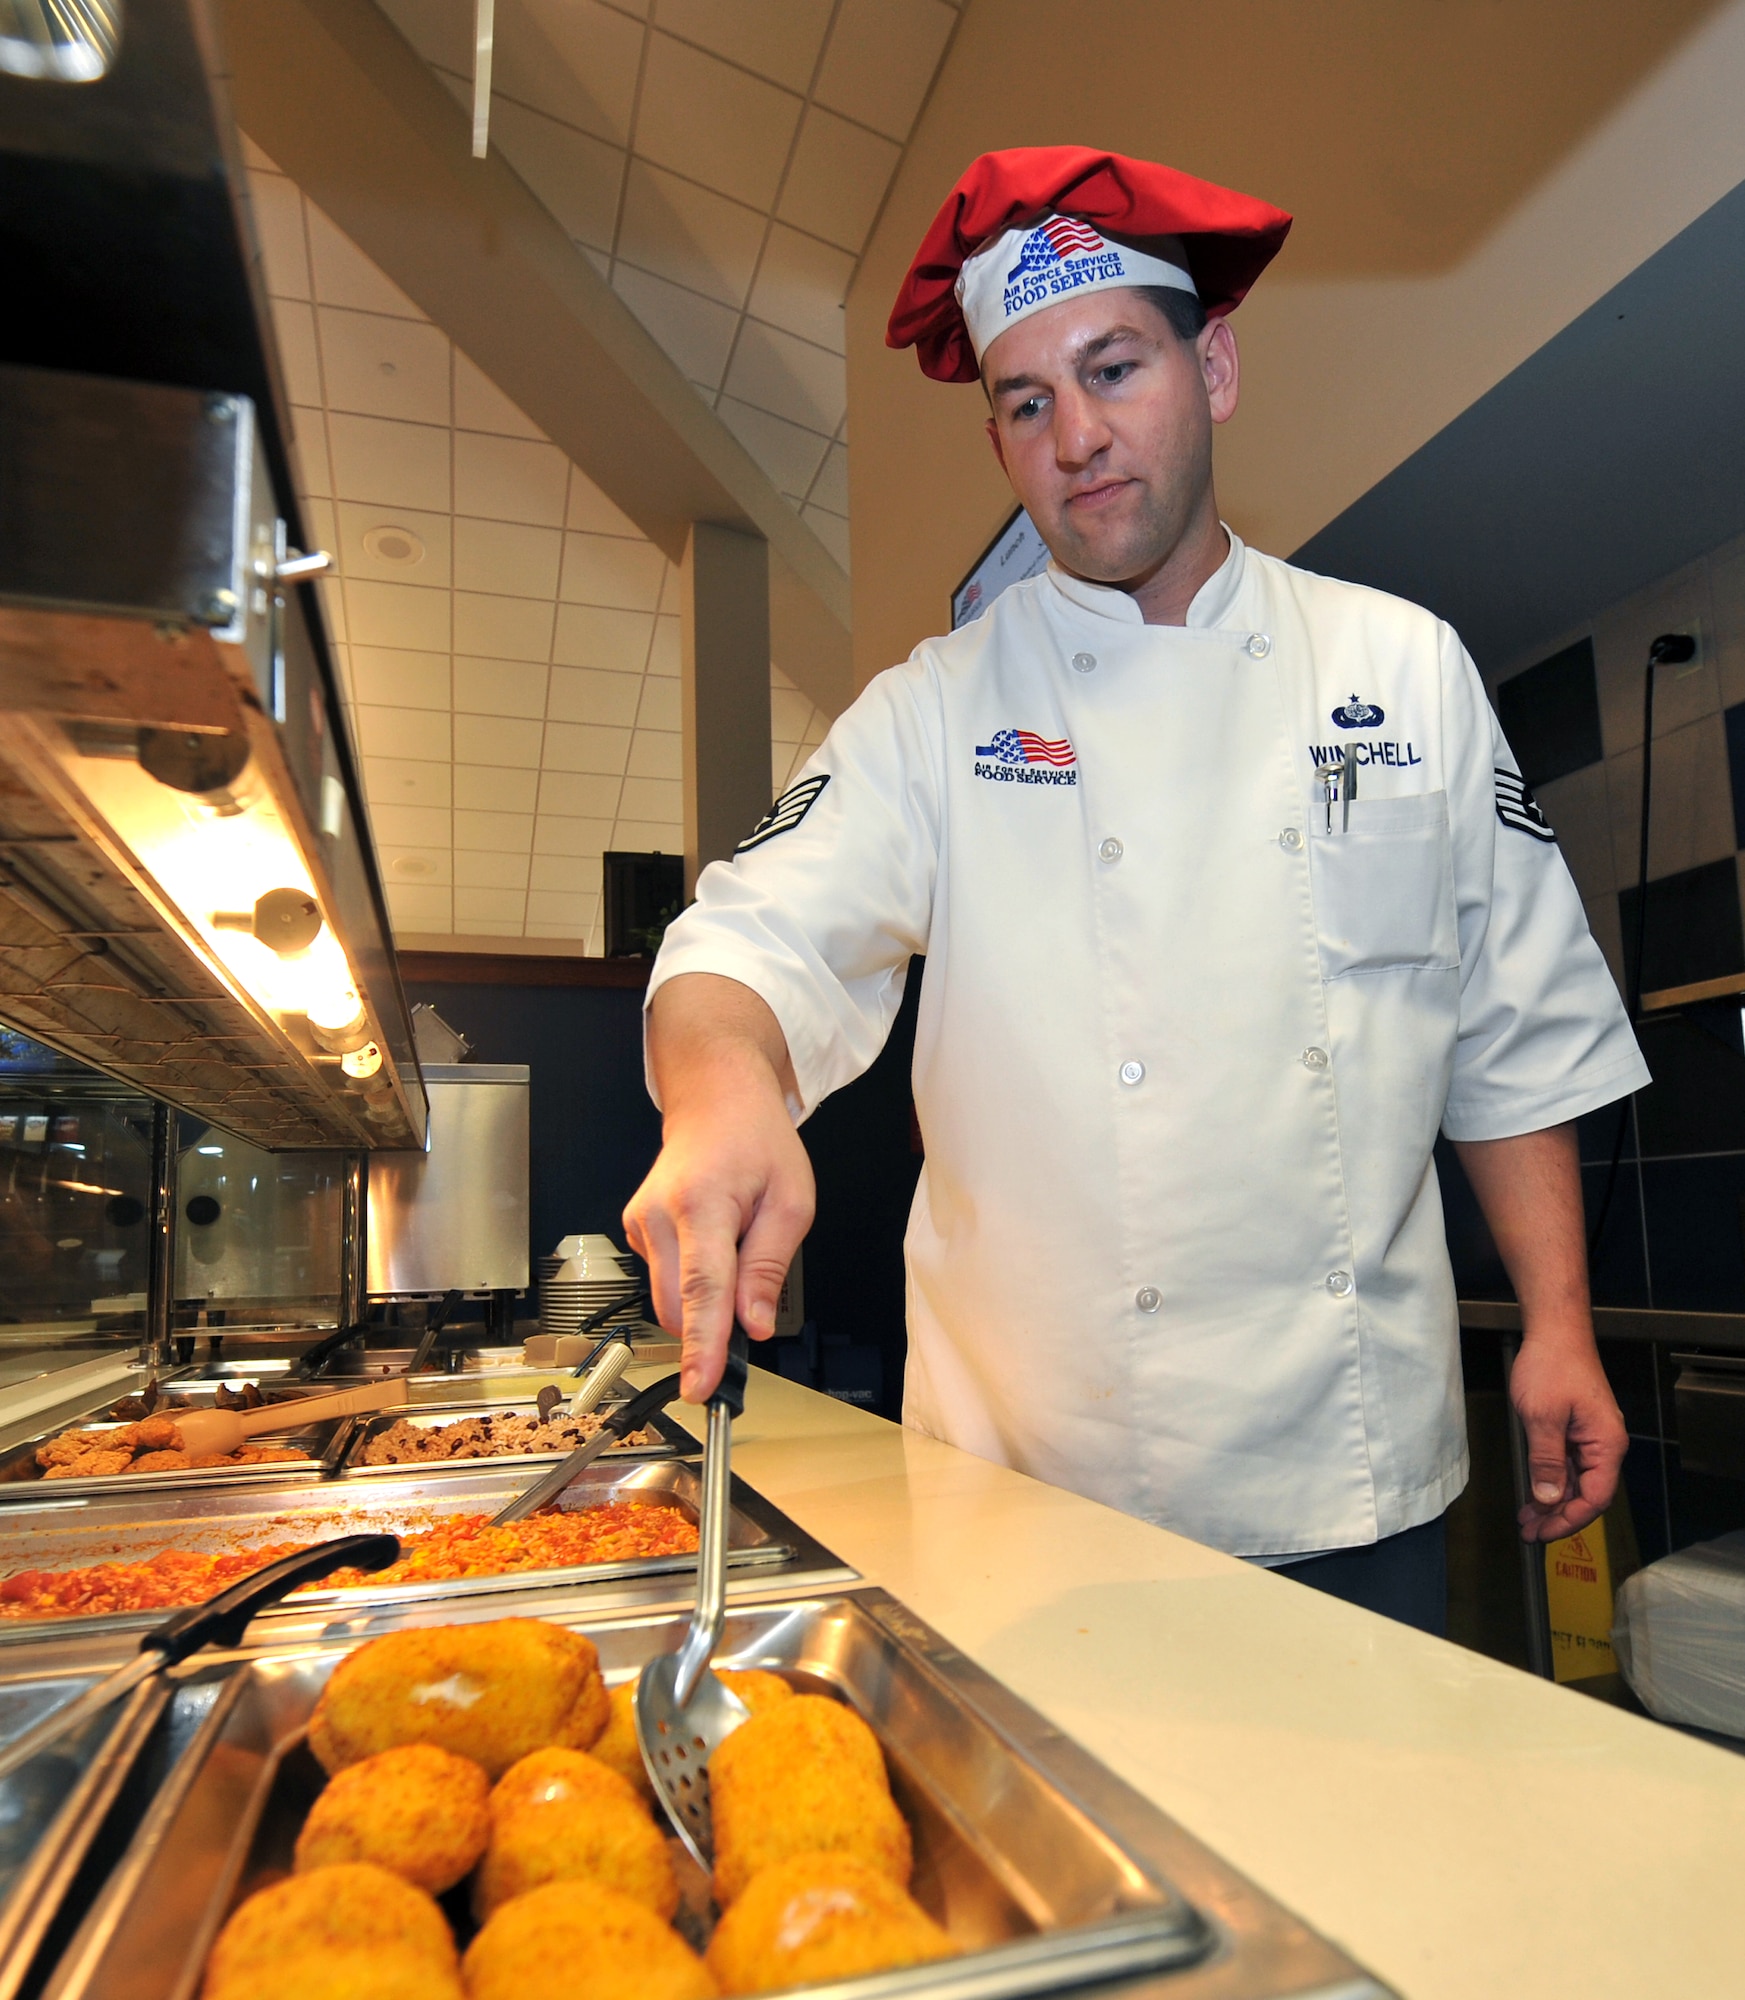 Tech. Sgt. David Winchell, 19th Force Support Squadron dining facility shift leader, serves chicken cordon bleu Aug. 26 to members of Team Little Rock. The dining facility serves more than 21,500 meals each month to servicemembers. (U.S. Air Force photo by Staff Sgt. Chris Willis)